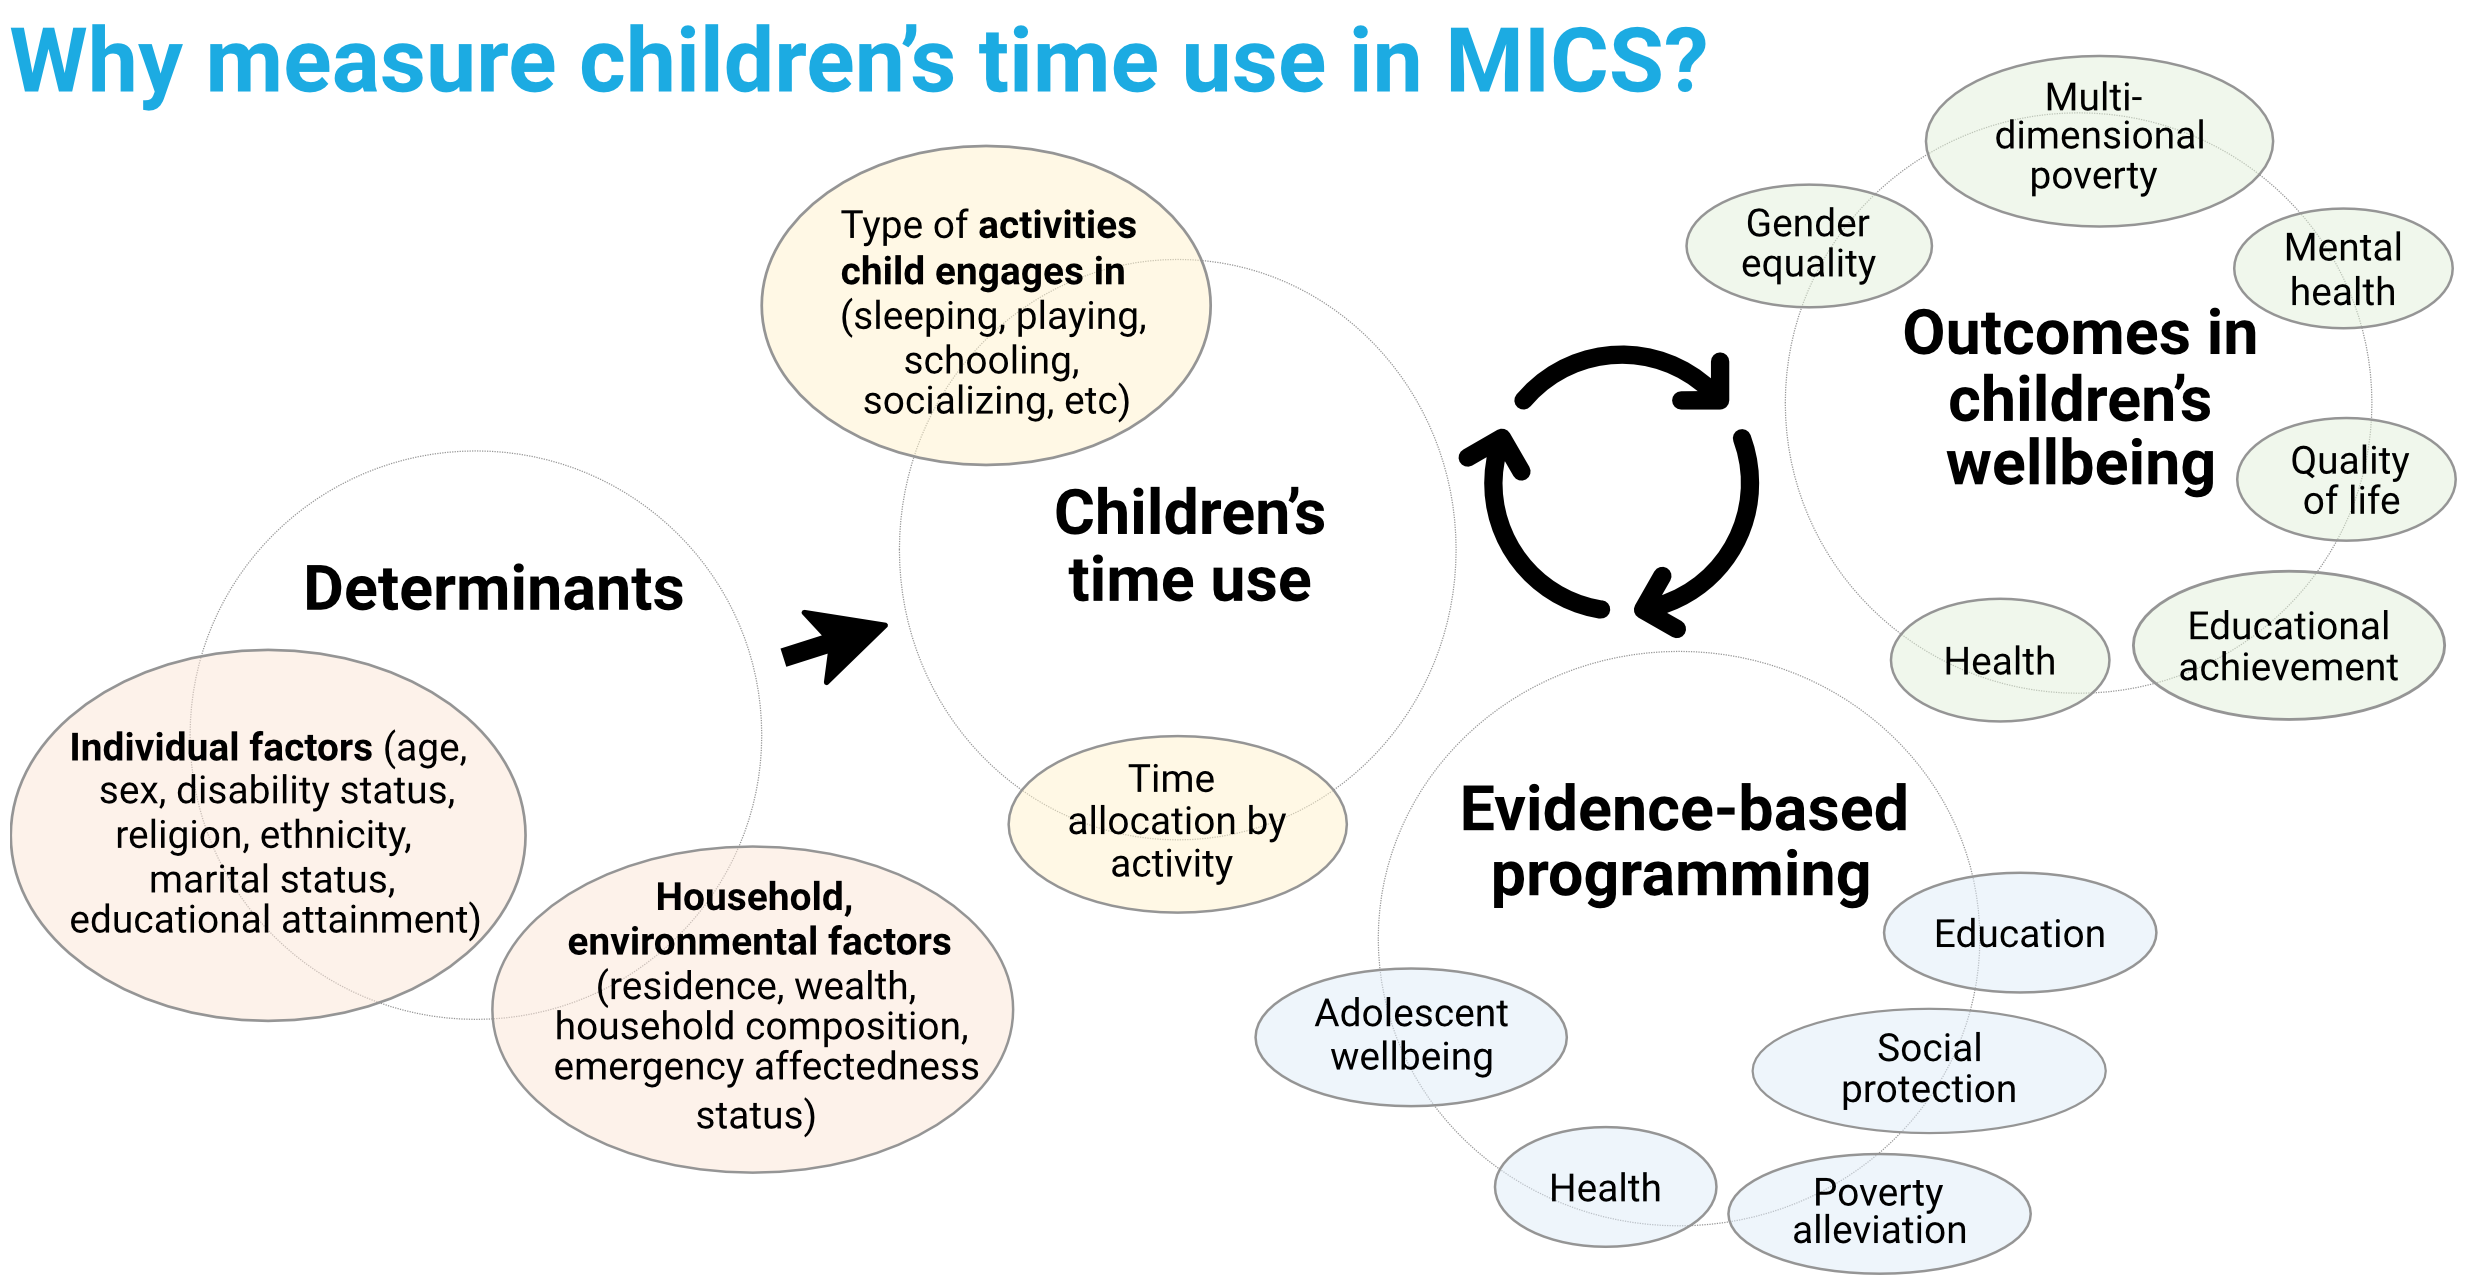 Why measure children's time use in MICS